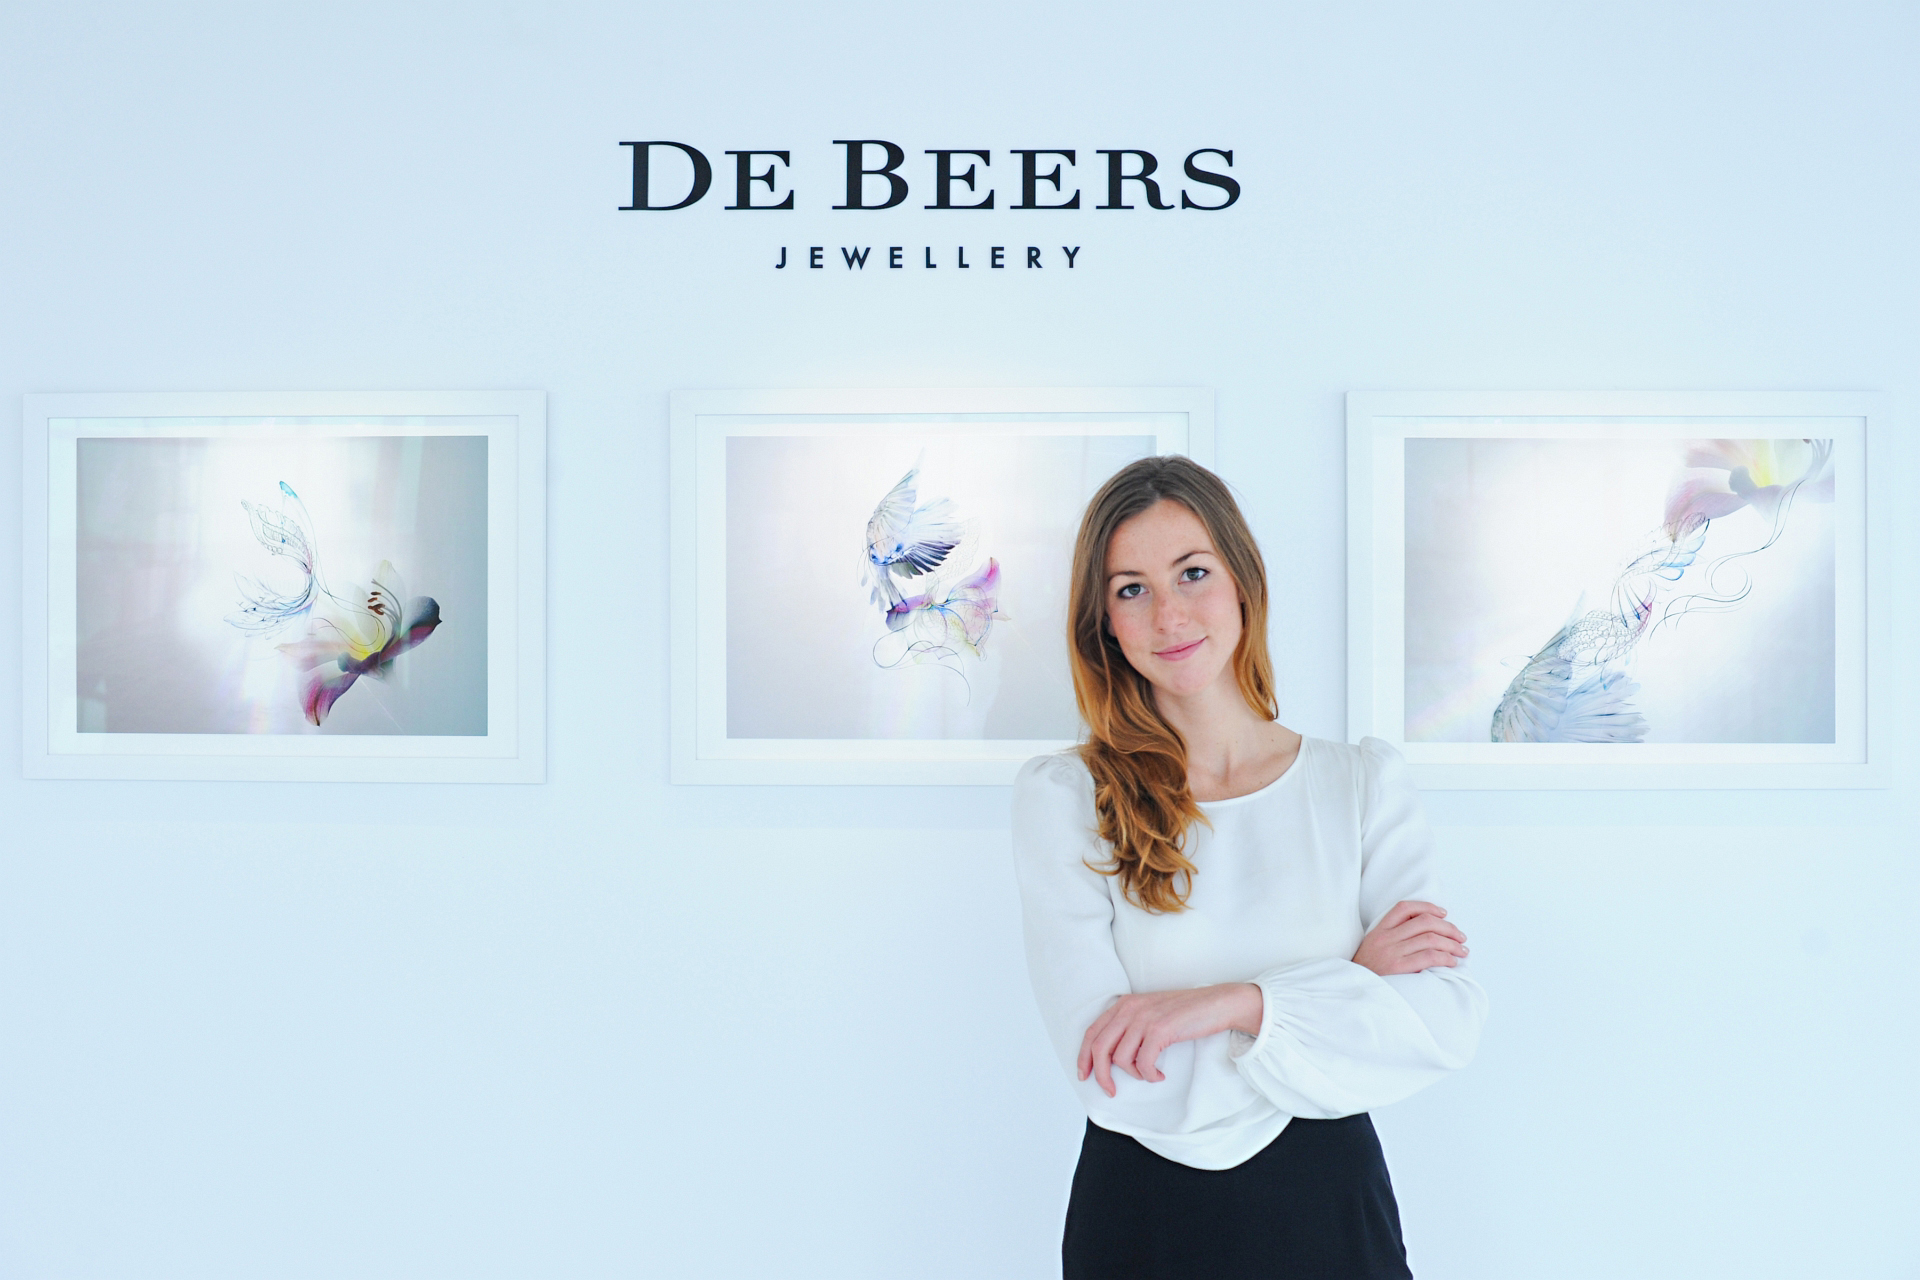 Hollie Bonneville-Barden, 27, a designer for De Beers Diamond Jewellers, has just completed Imaginary Nature, her first complete jewelry collection, for the company. 